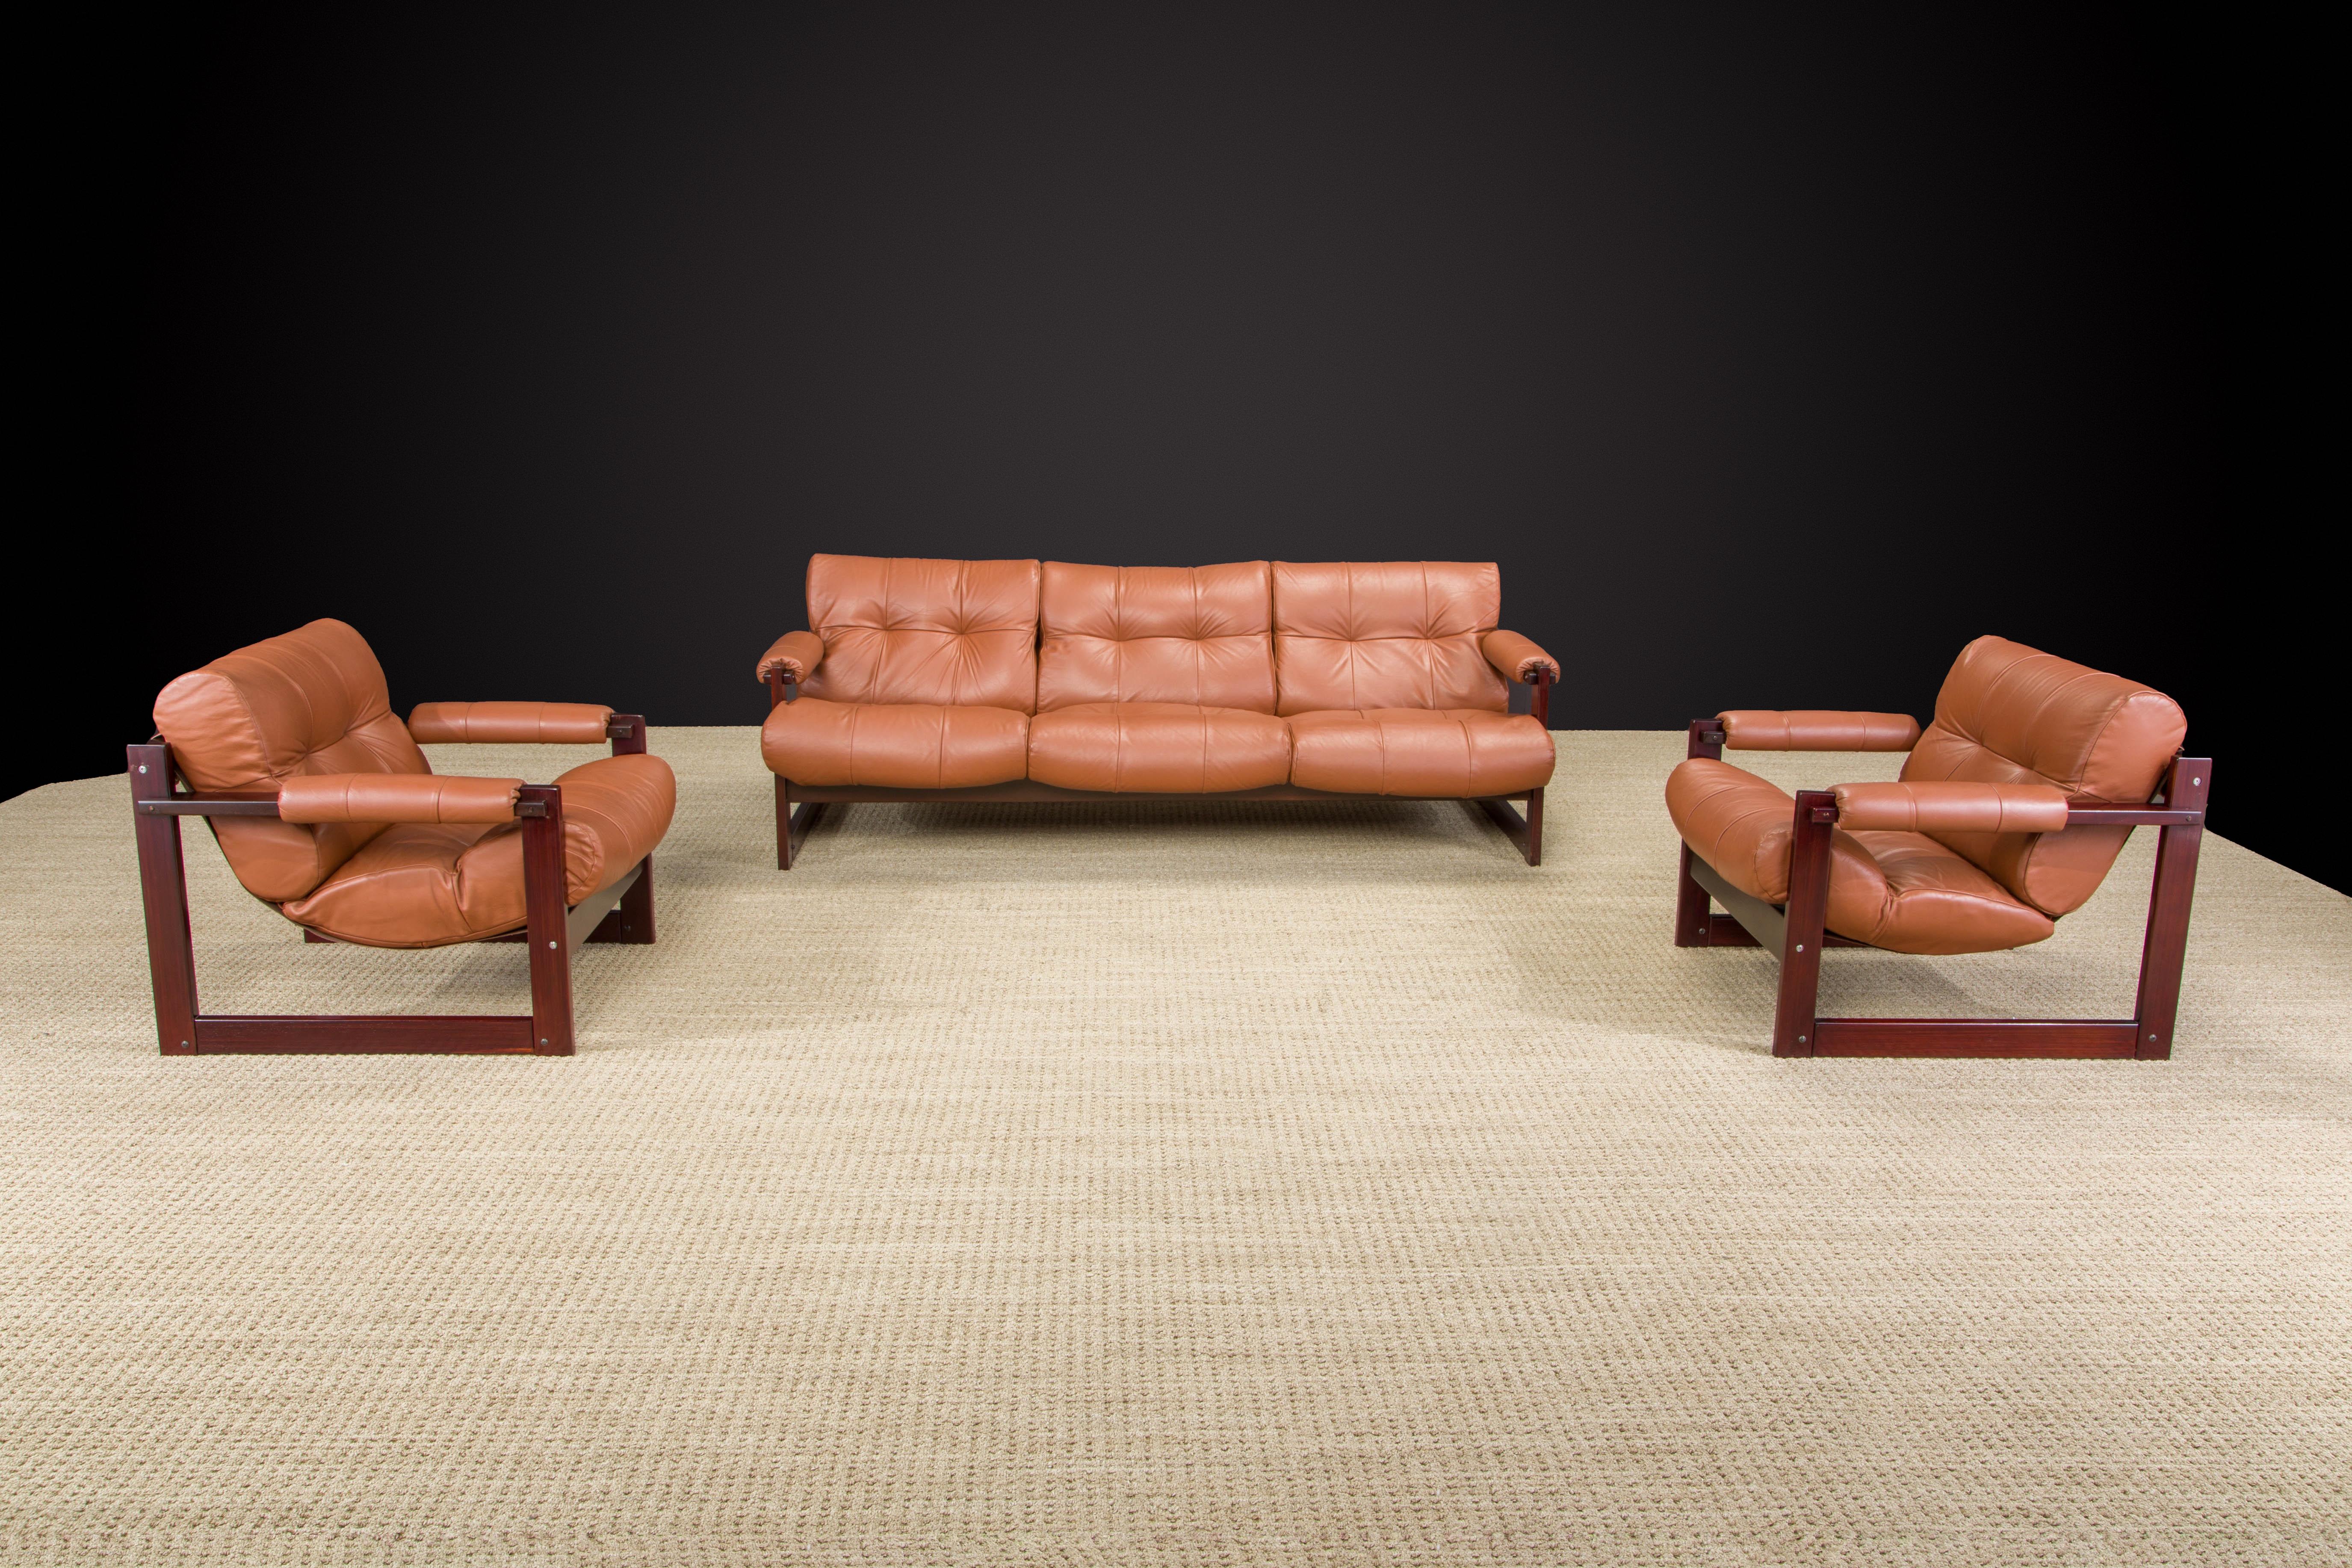 Mid-Century Modern Percival Lafer 'S-1' Rosewood and Leather Living Room Set, Brazil, 1976, Signed